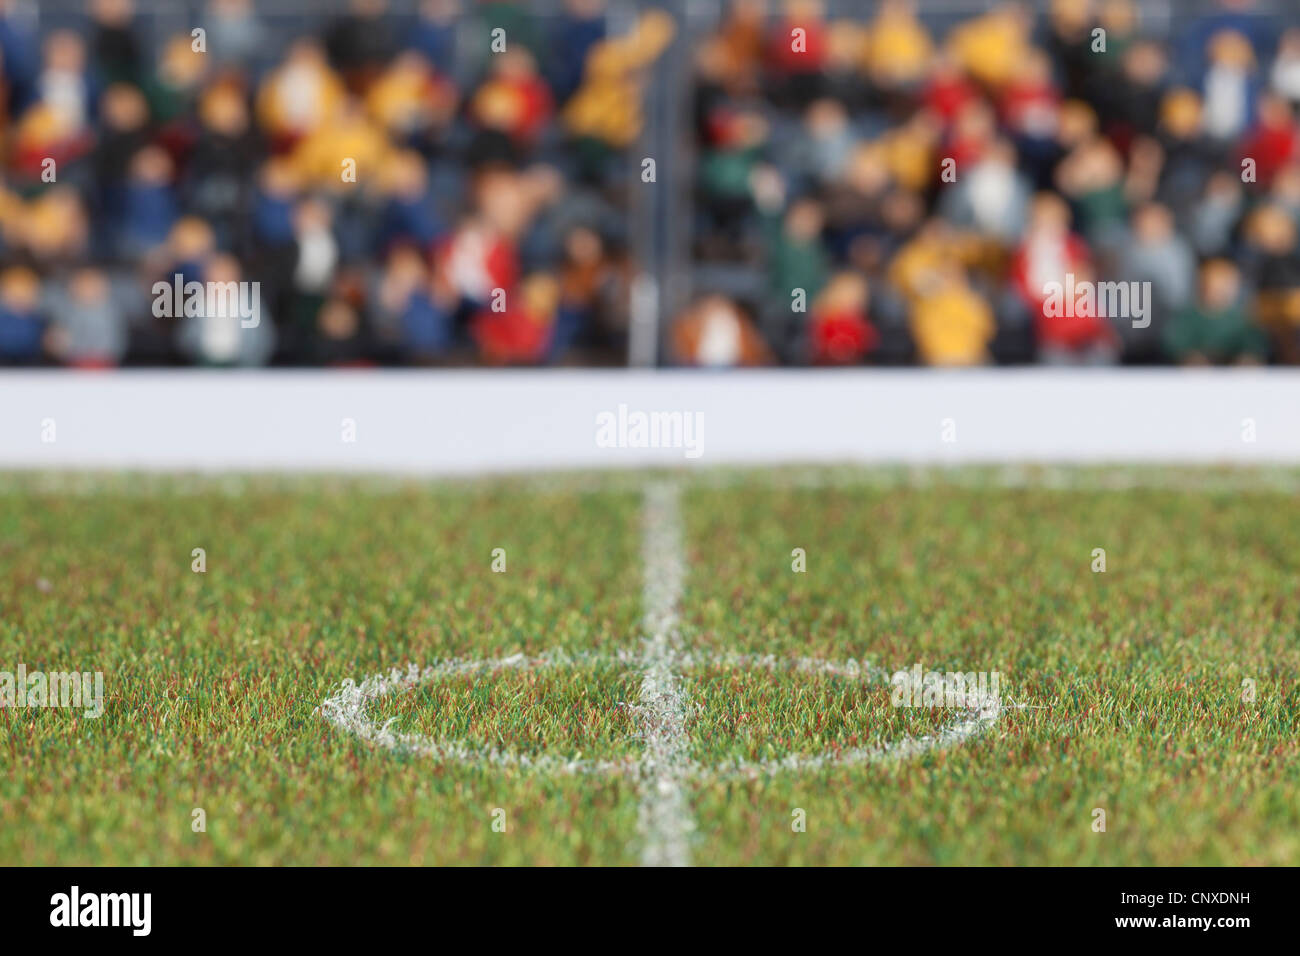 The center field of a miniature soccer field, spectator figurines in background Stock Photo